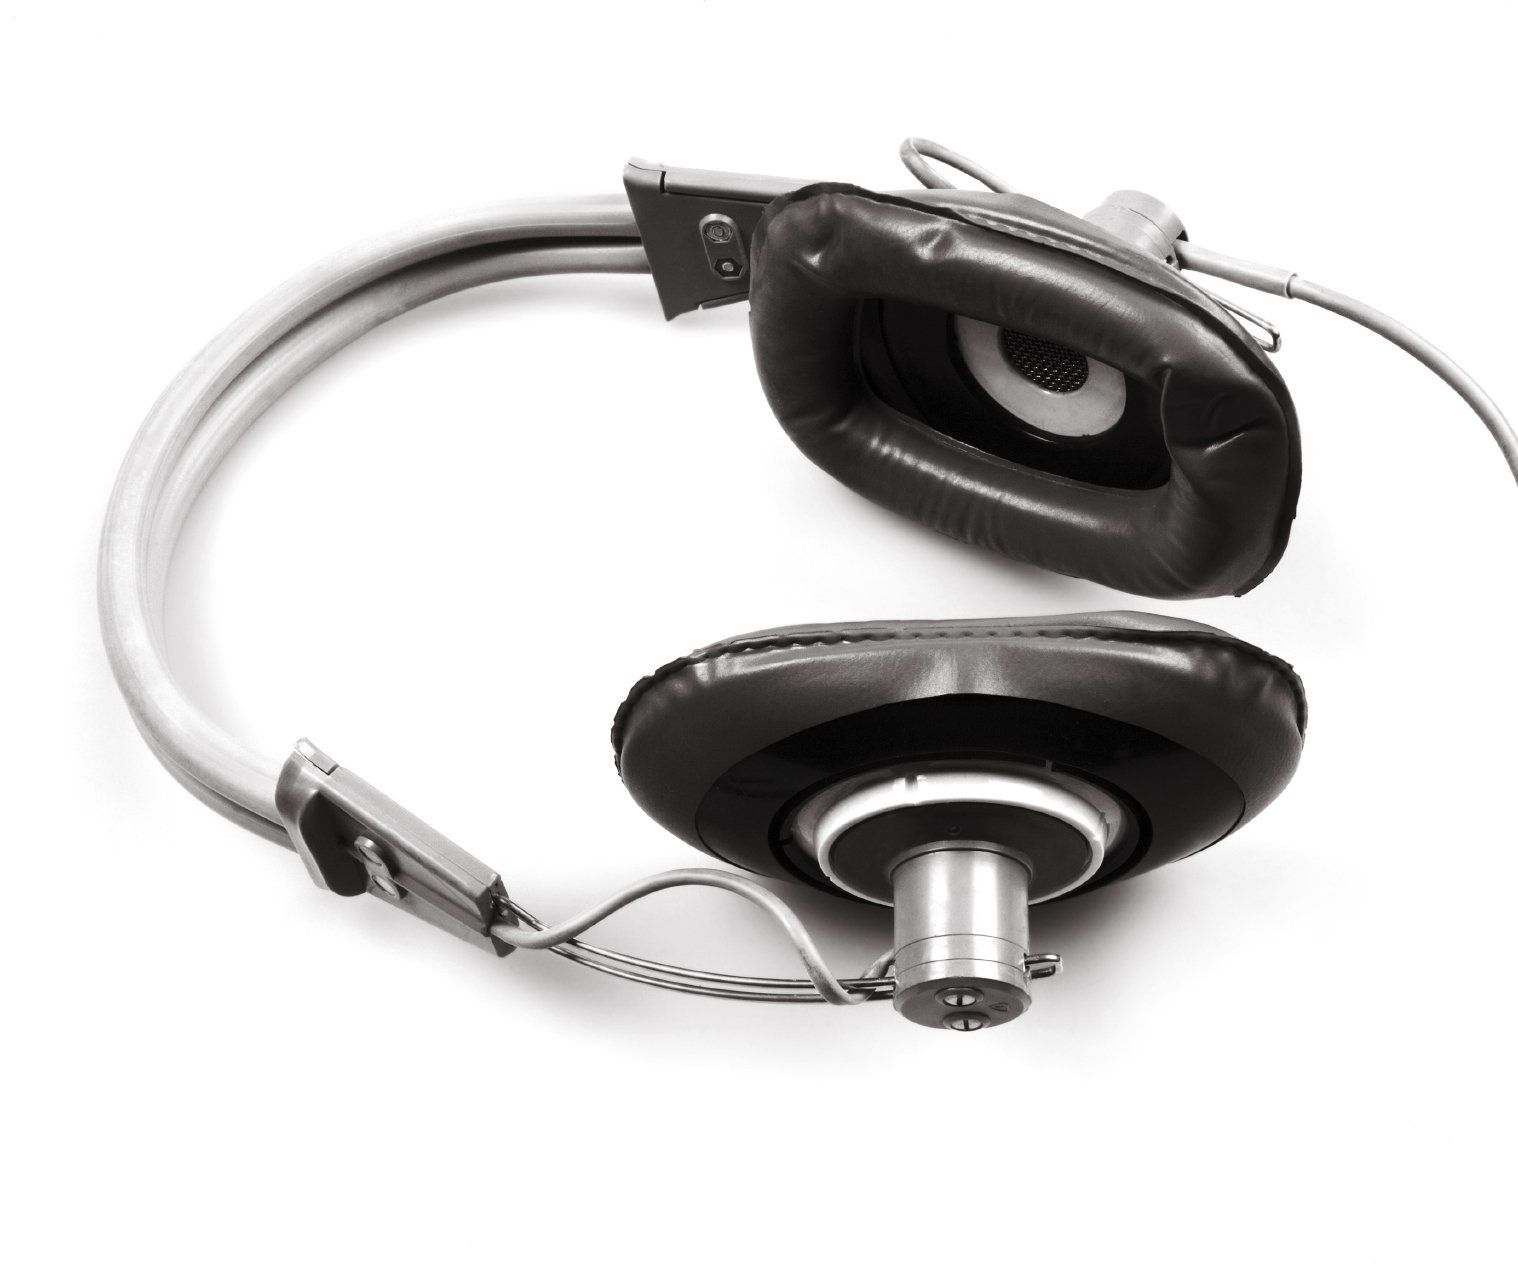 Black and Silver headphones on a white background.